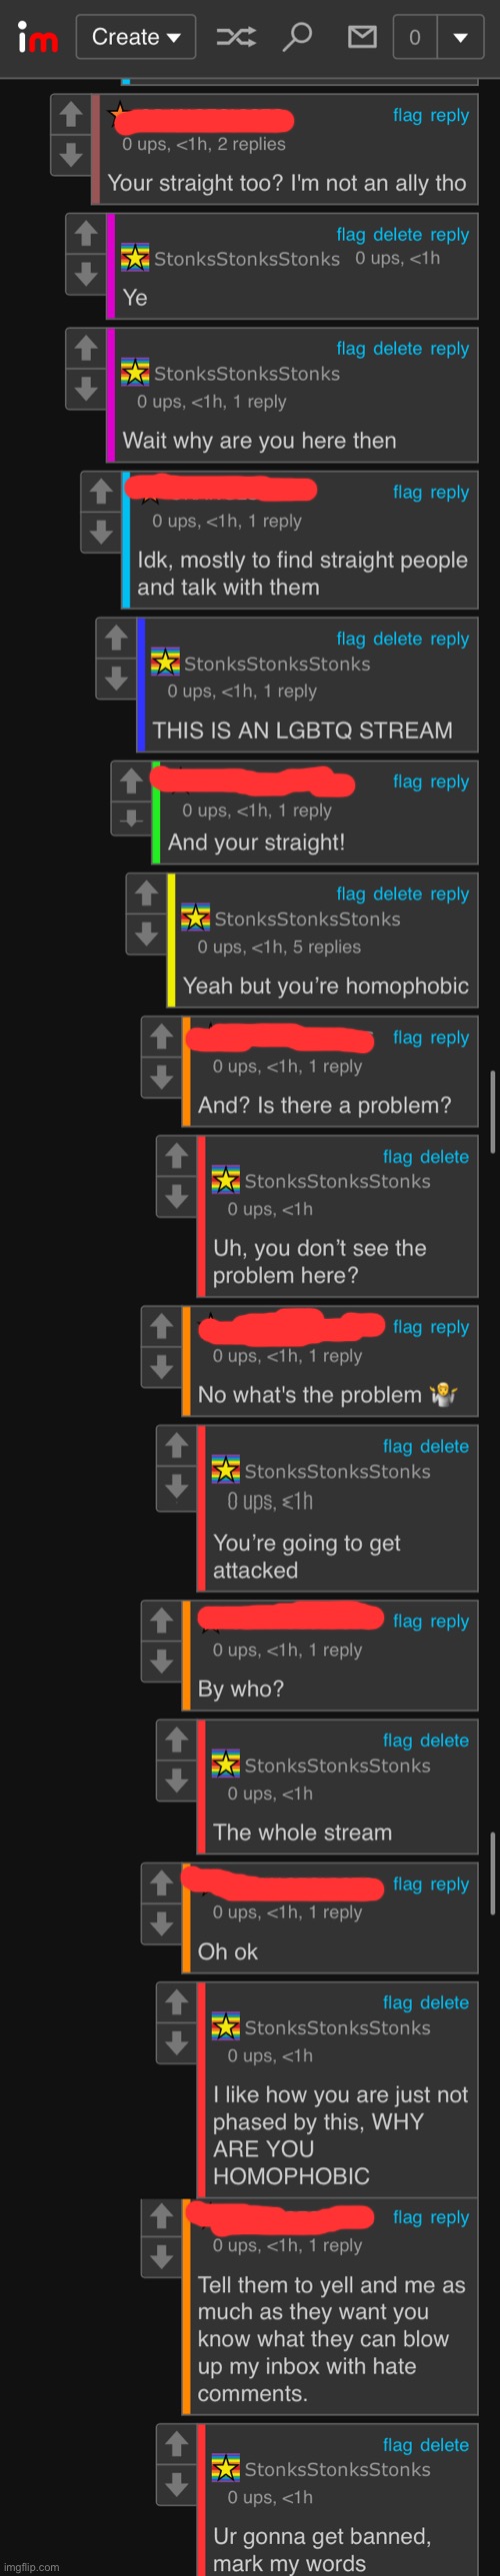 Homophobic person spotted | image tagged in homophobic,comments | made w/ Imgflip meme maker